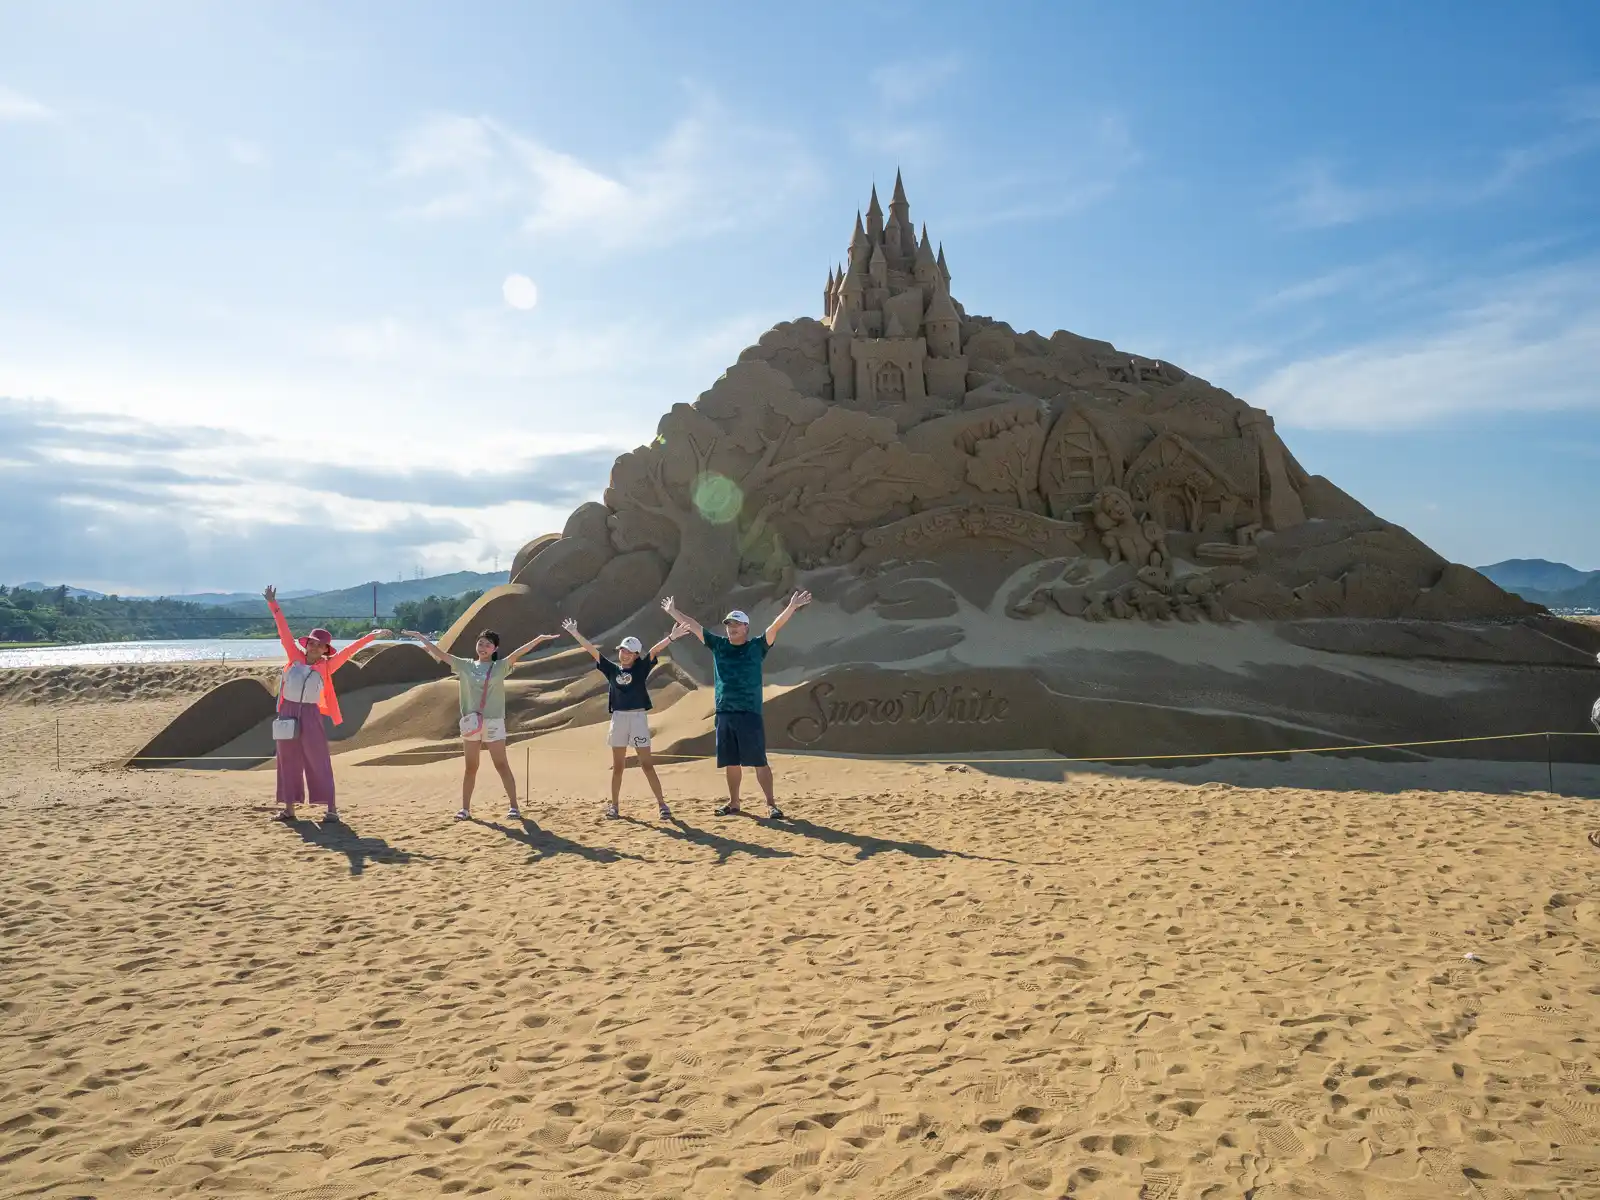 Tourists are posting in front of sand sculpture of Snow White's Castle.